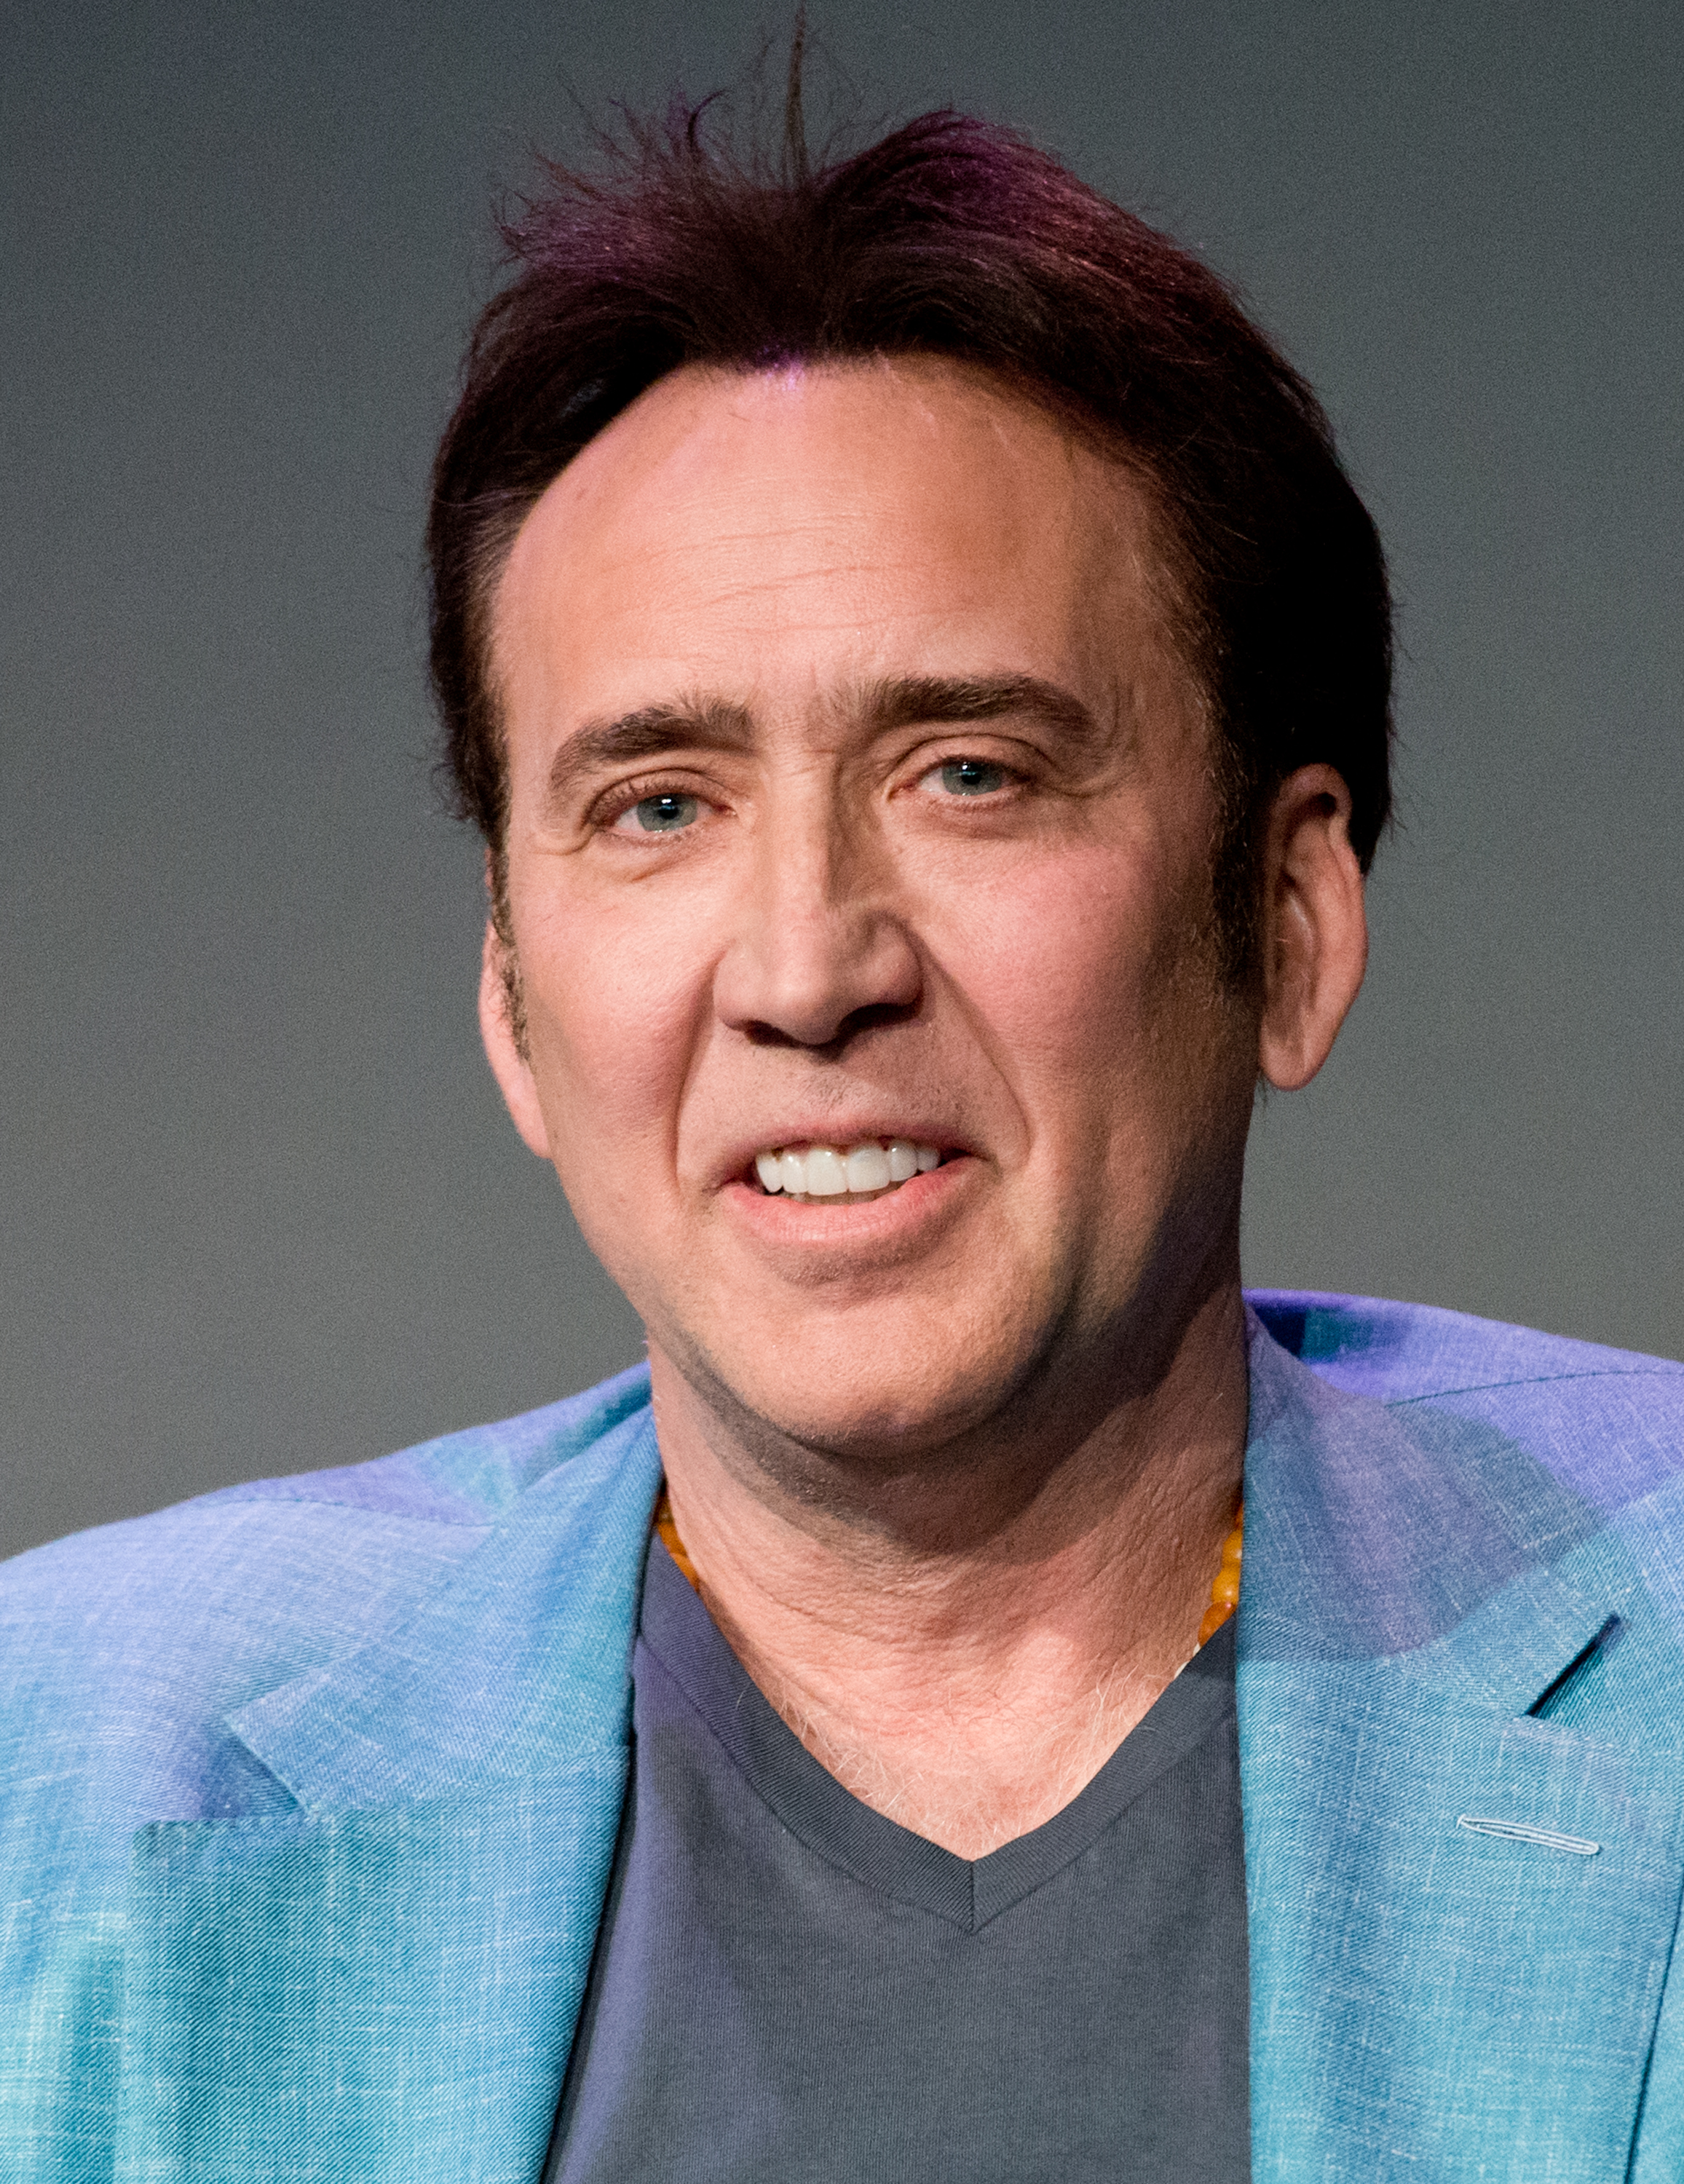 Nicolas Cage in New York City on April 10, 2014 | Source: Getty Images